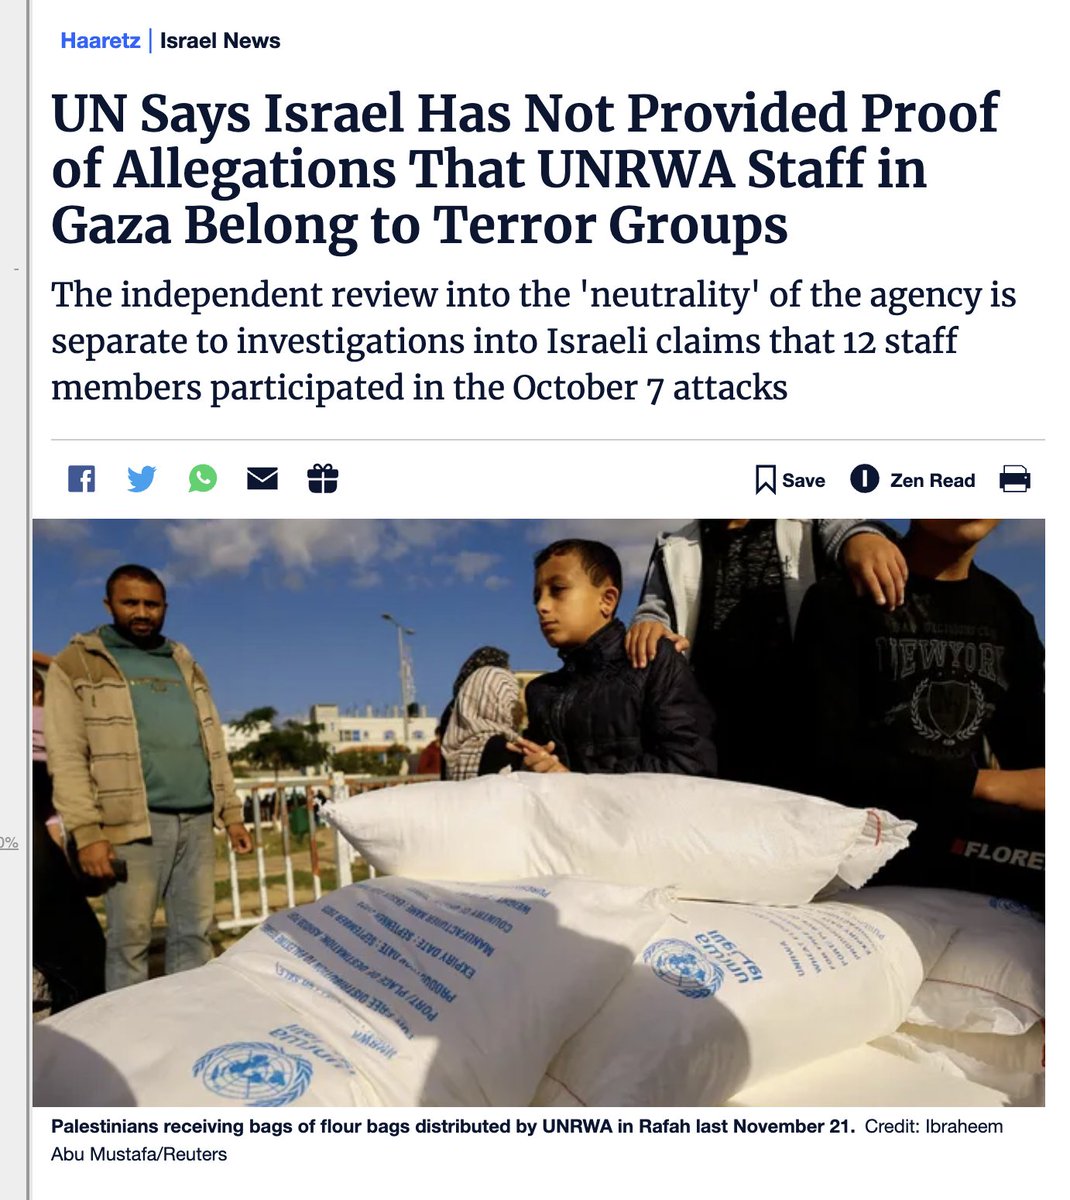 16\ UNRWA: In Jan, Israel claims 12 UNRWA workers took part in Oct 7 & that thousands of UNRWA staff are Hamas & PIJ members. Four months later, ZERO evidence is presented by Israel to support this. Israel killed over 170 UNRWA workers!